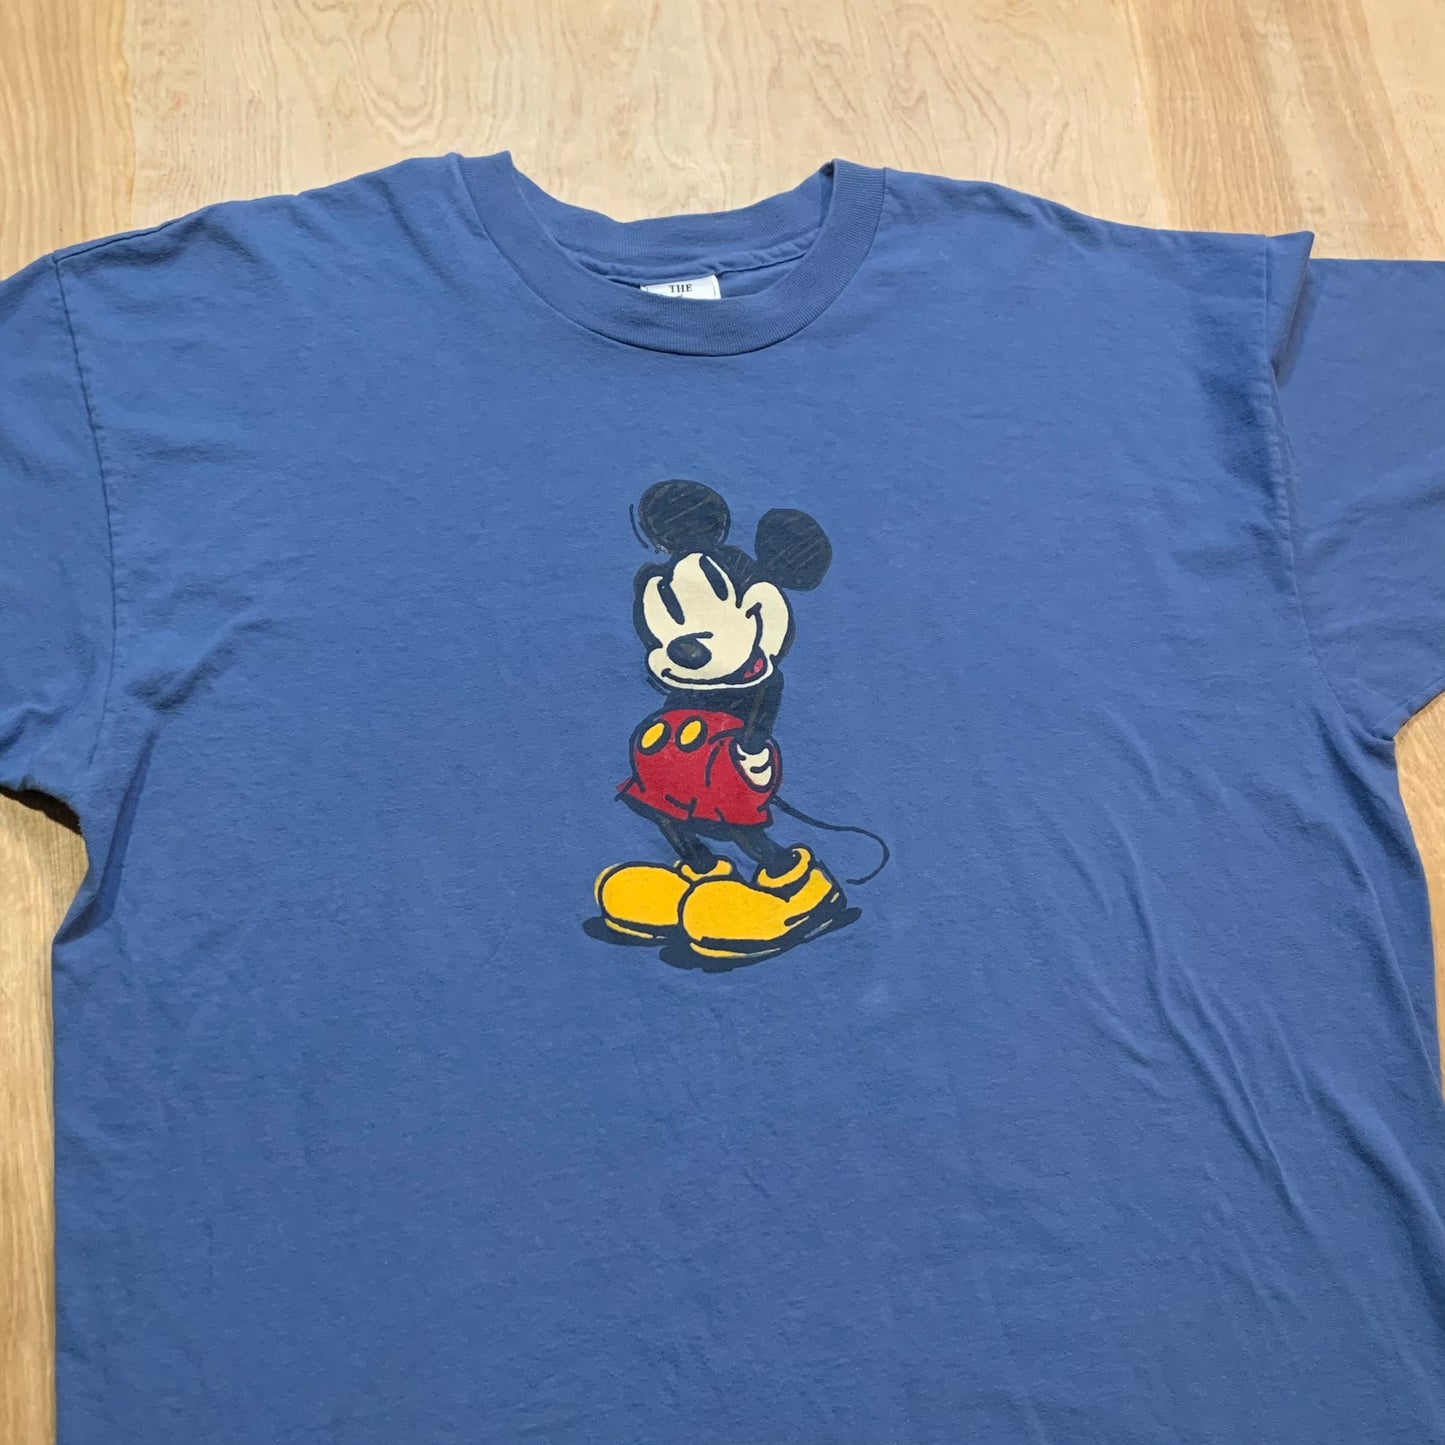 Vintage Disney Store Mickey Mouse T-Shirt